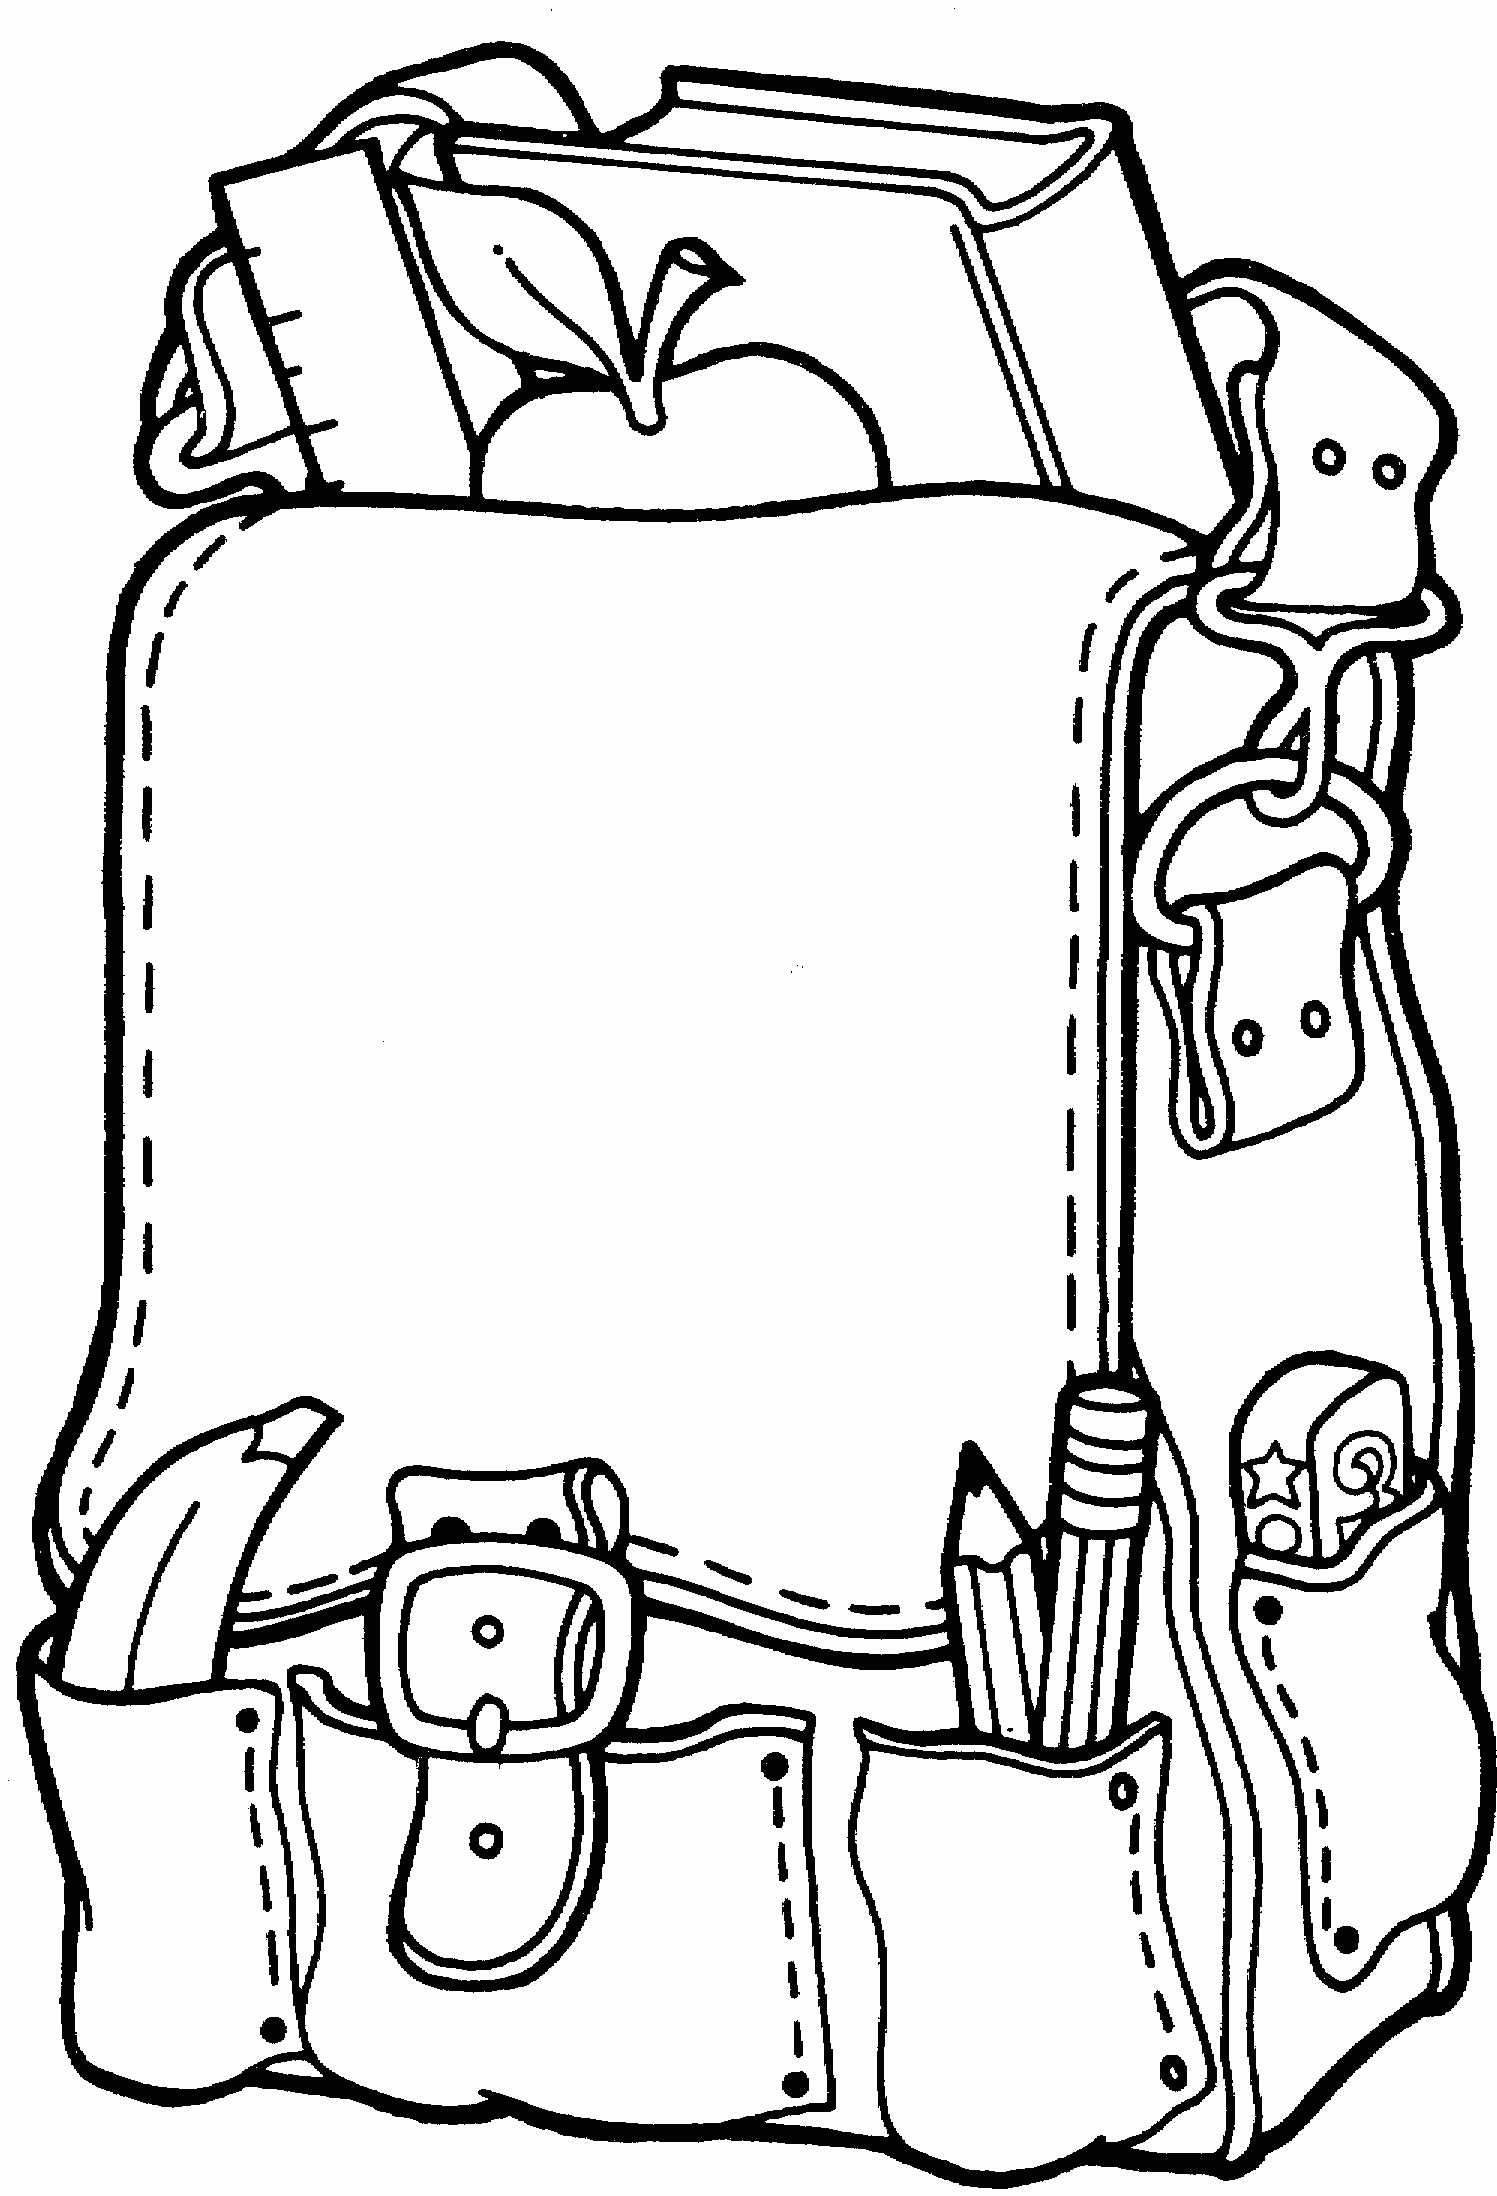 Free Printable Backpack Coloring Pages For Preschoolers | Clipart - Free Printable Coloring Sheets For Back To School